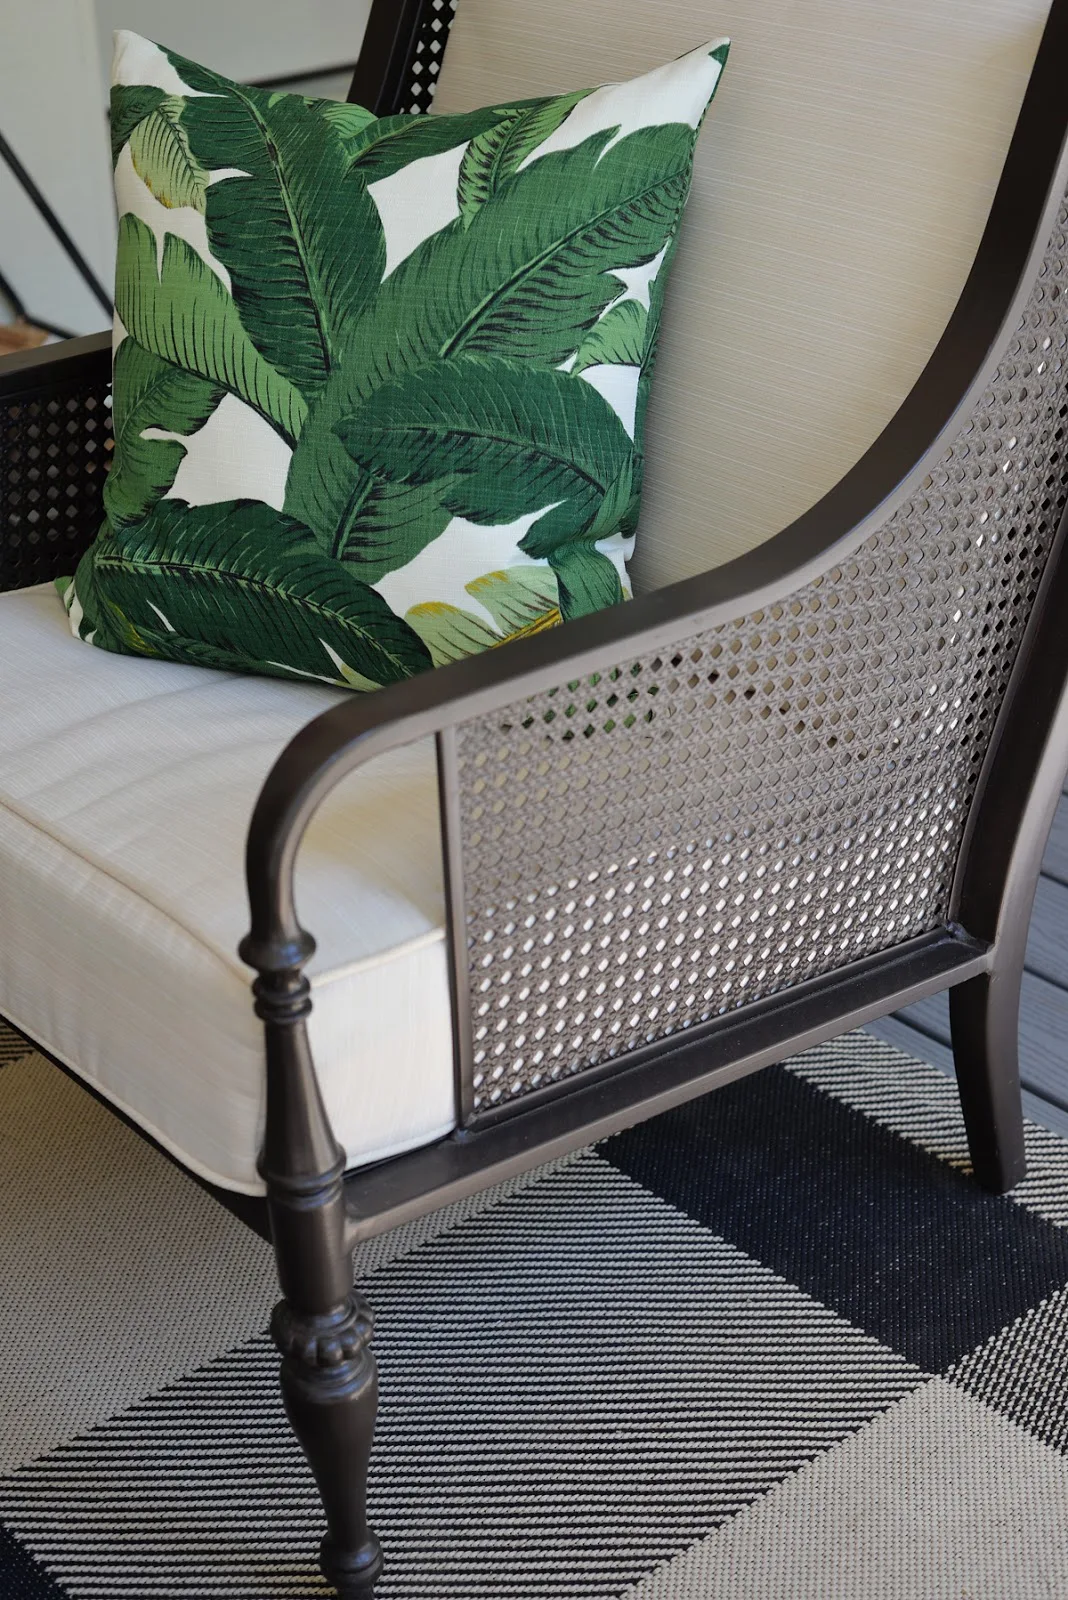 RamblingRenovators.ca | porch decor | outdoor caned chair,  plaid outdoor rug, palm leaves fabric